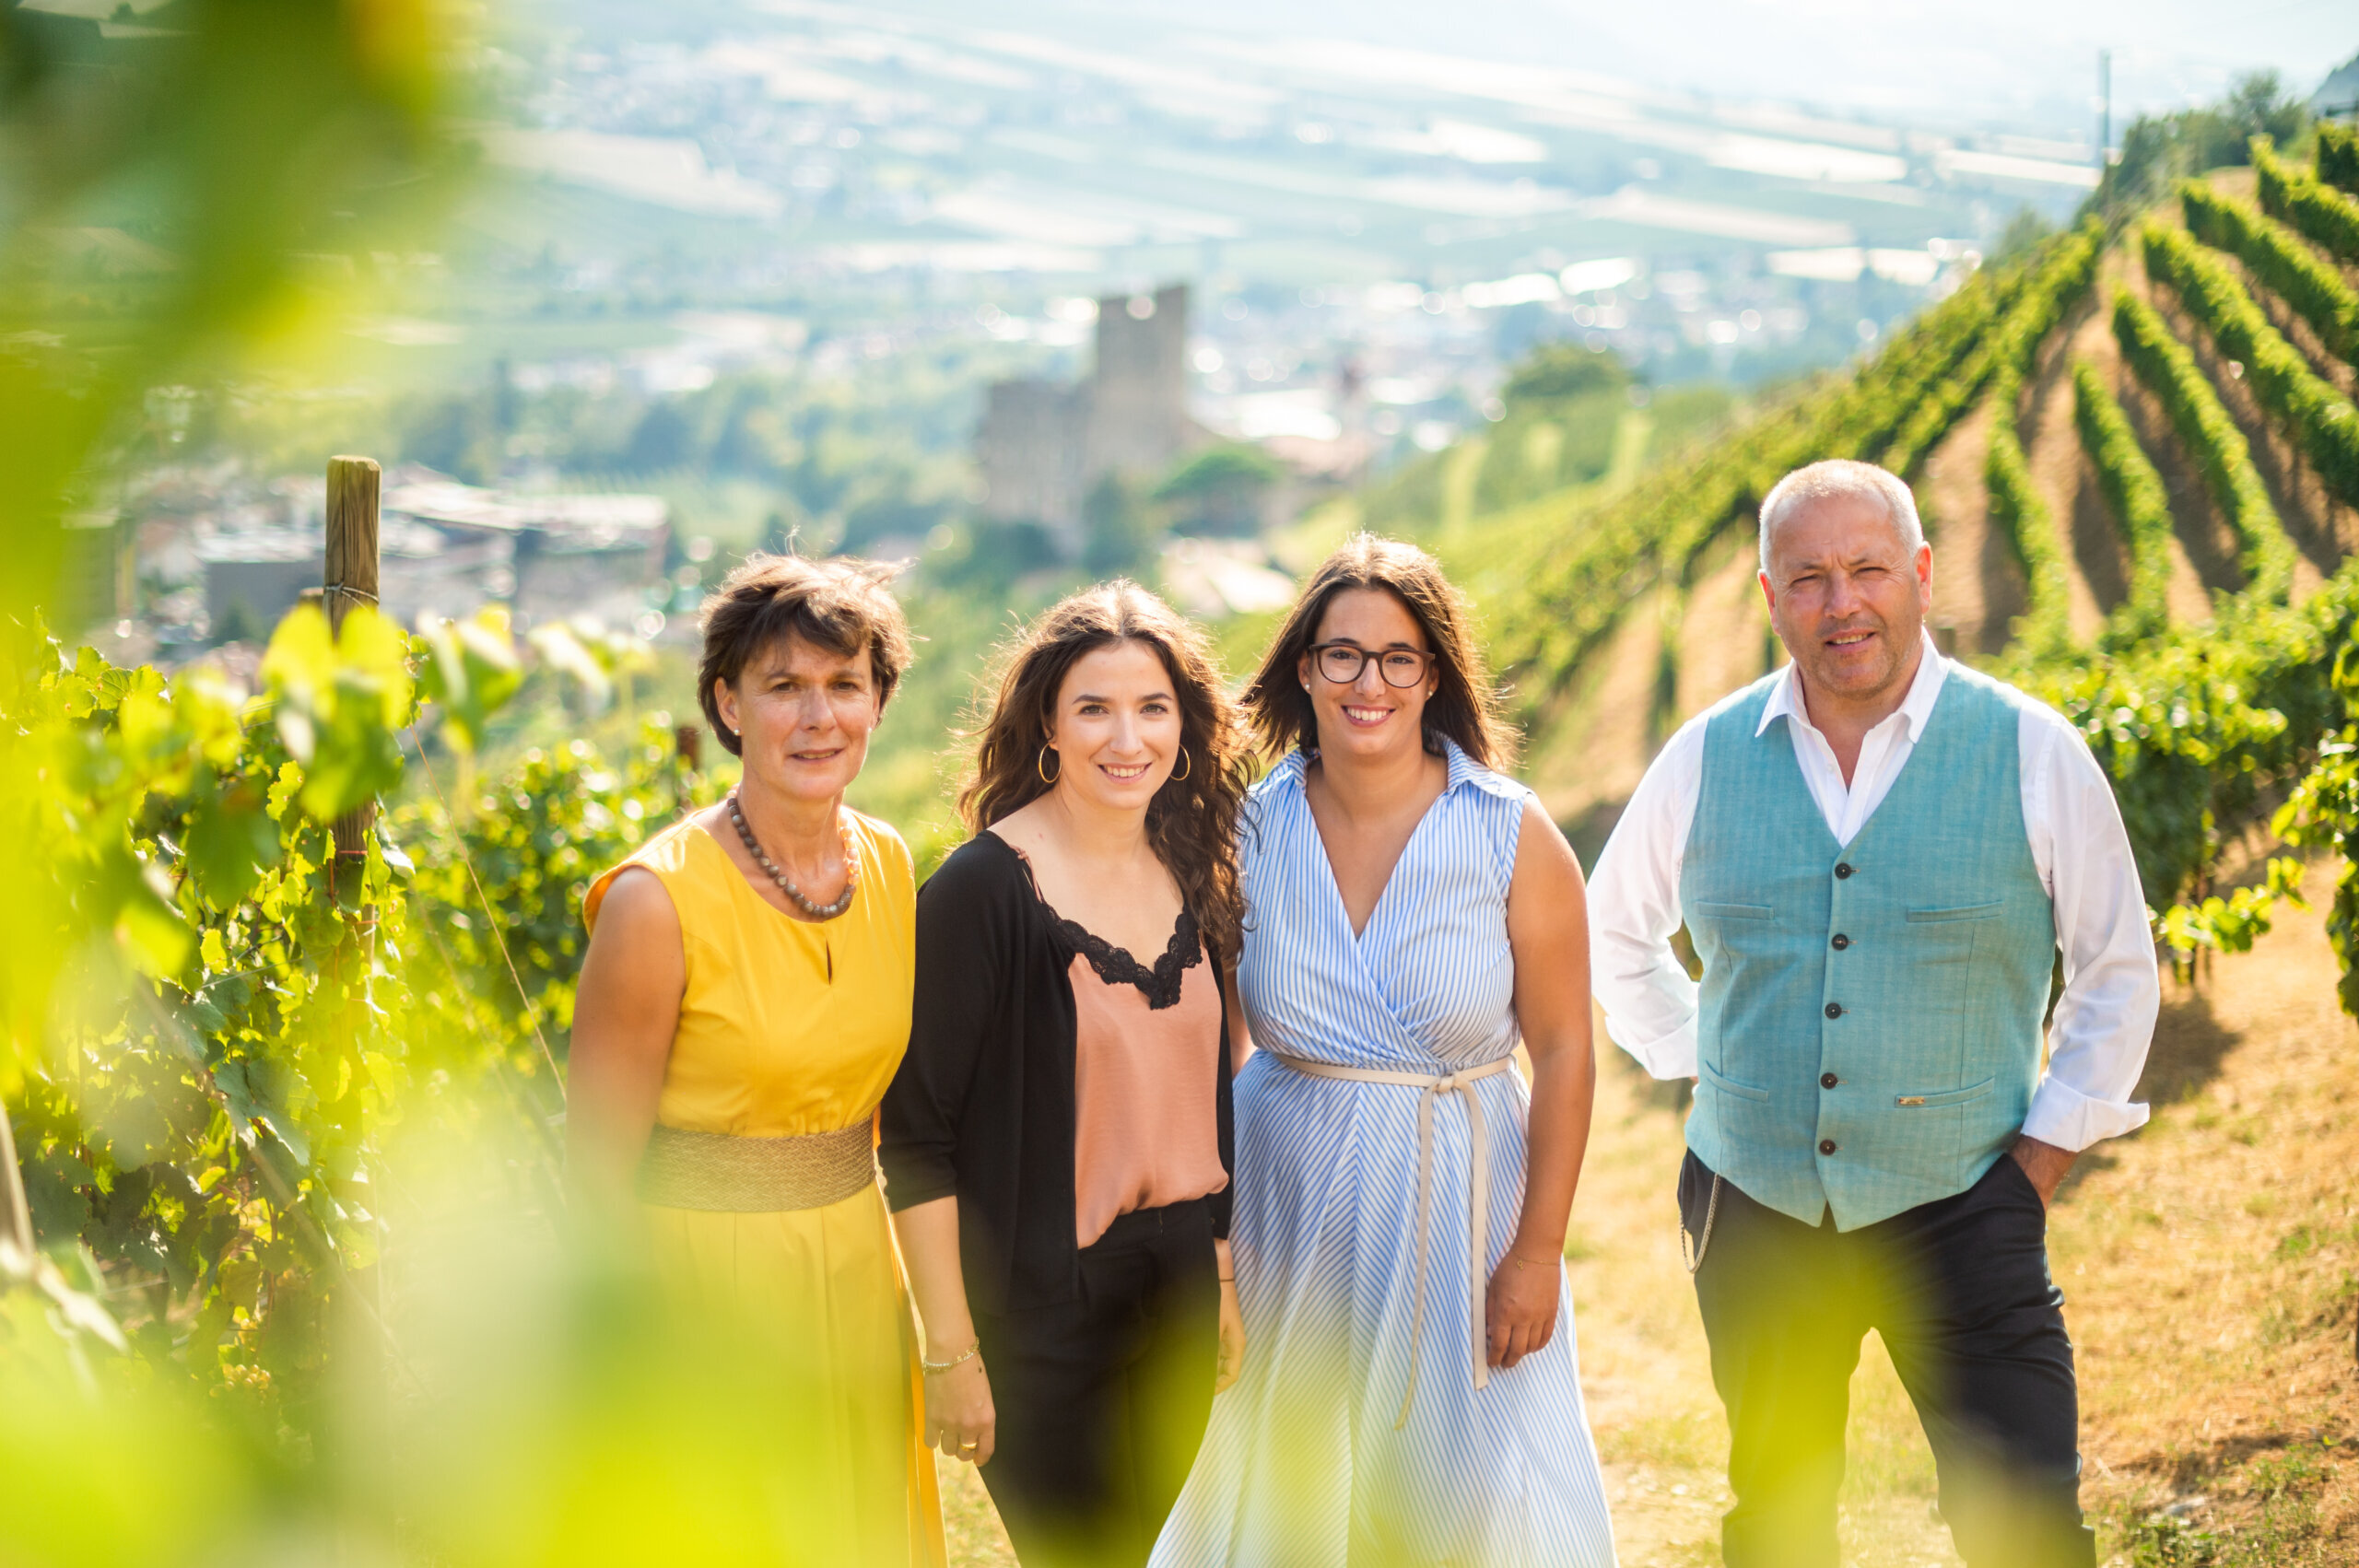 The Pratzner family of wine makers - Winery Falkenstein